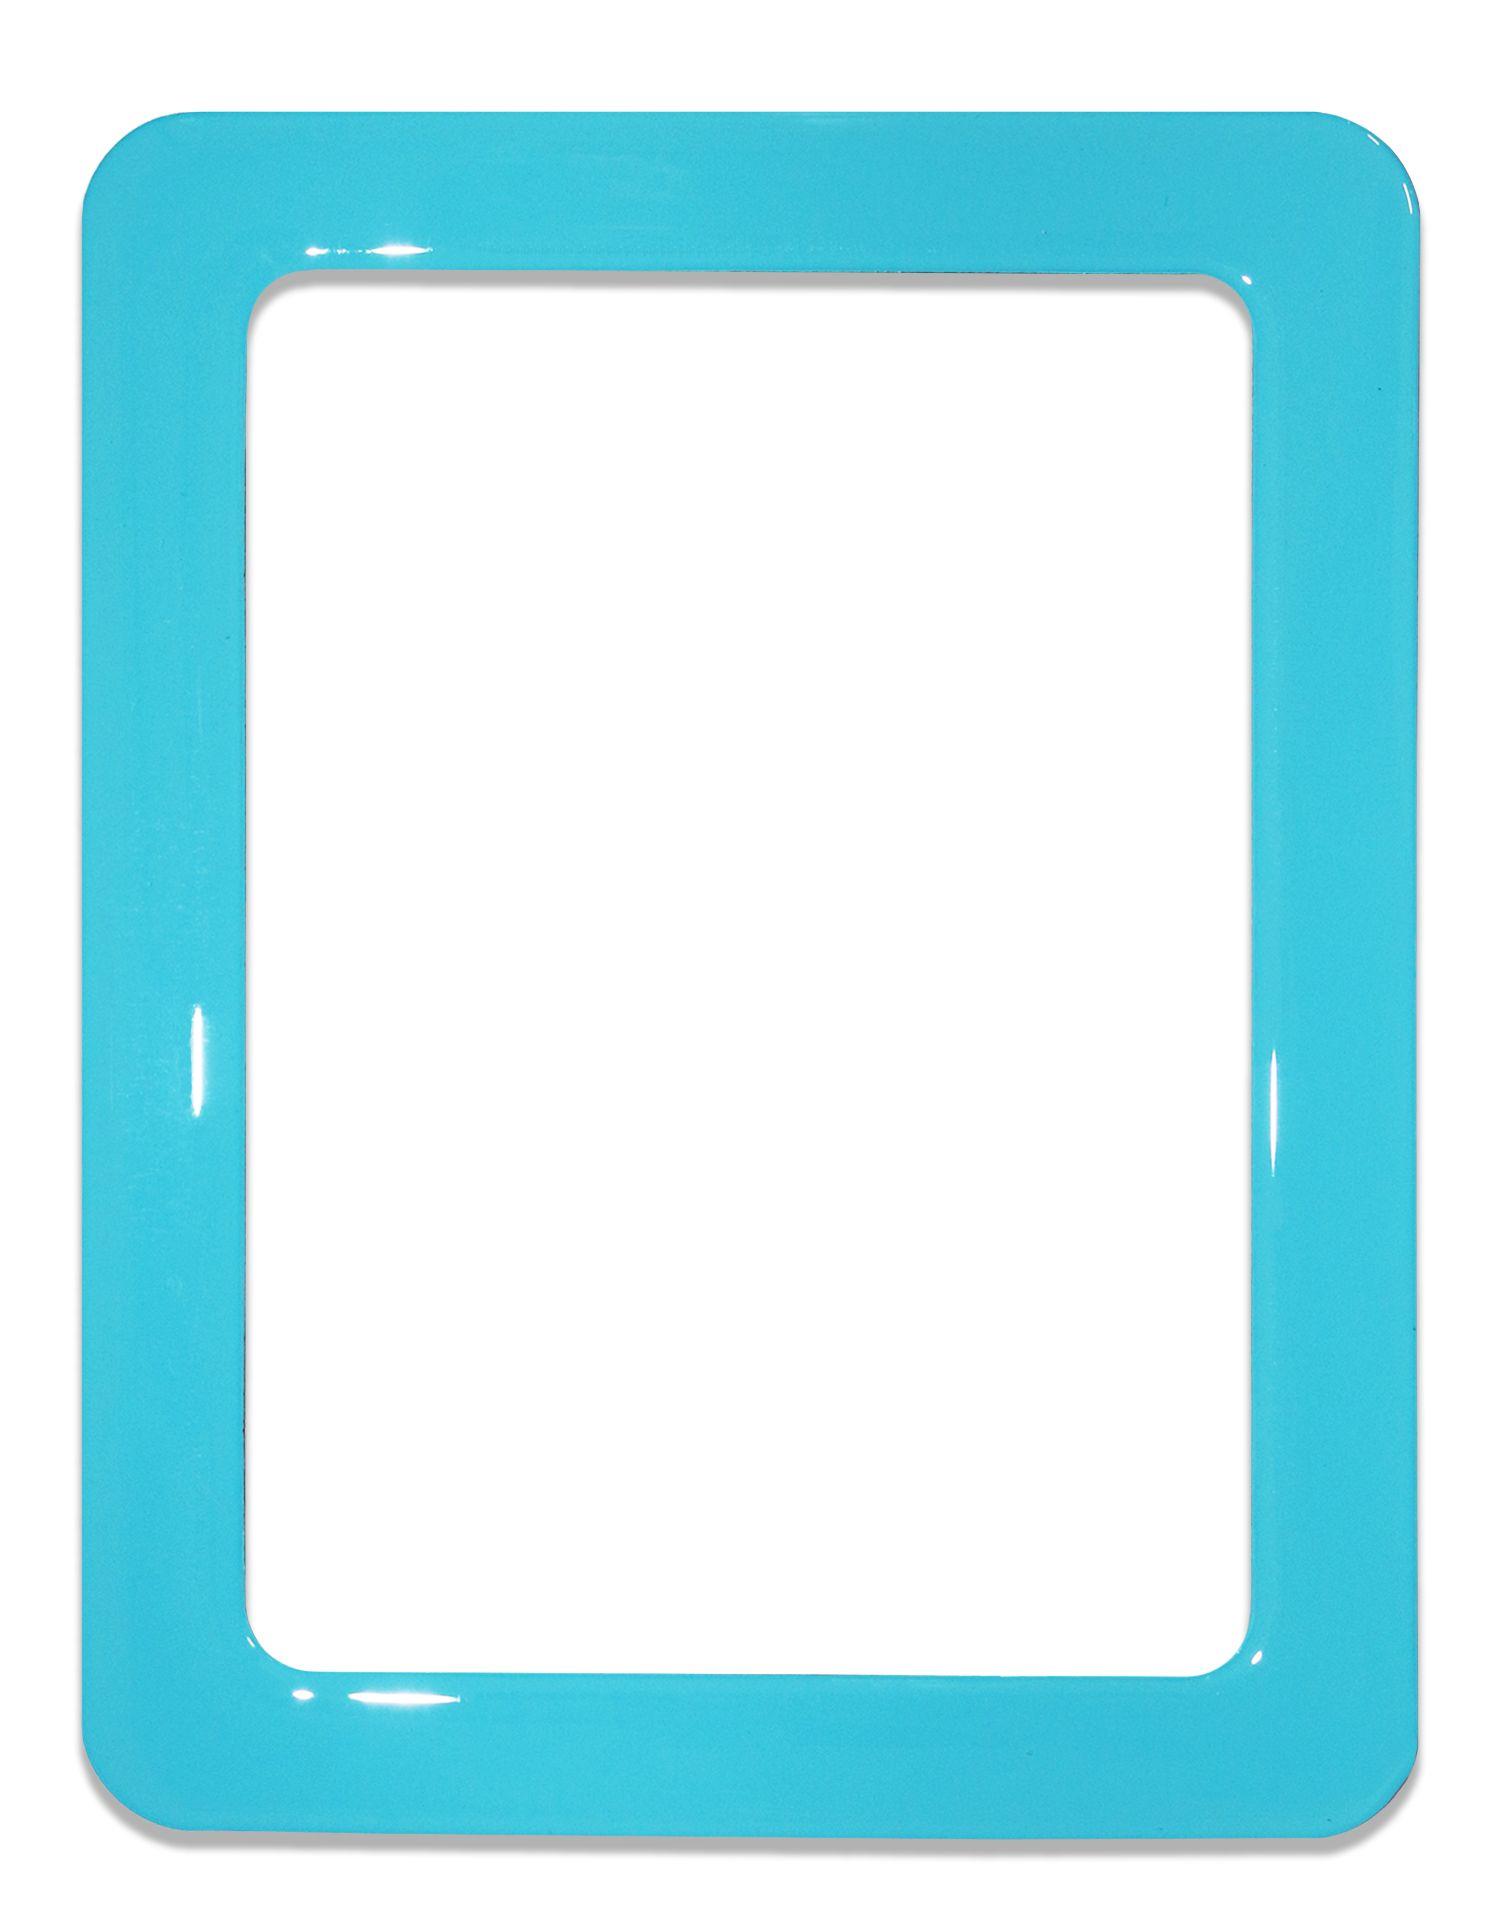 Magnetic self-adhesive frame size 16.0x11.8cm - light blue